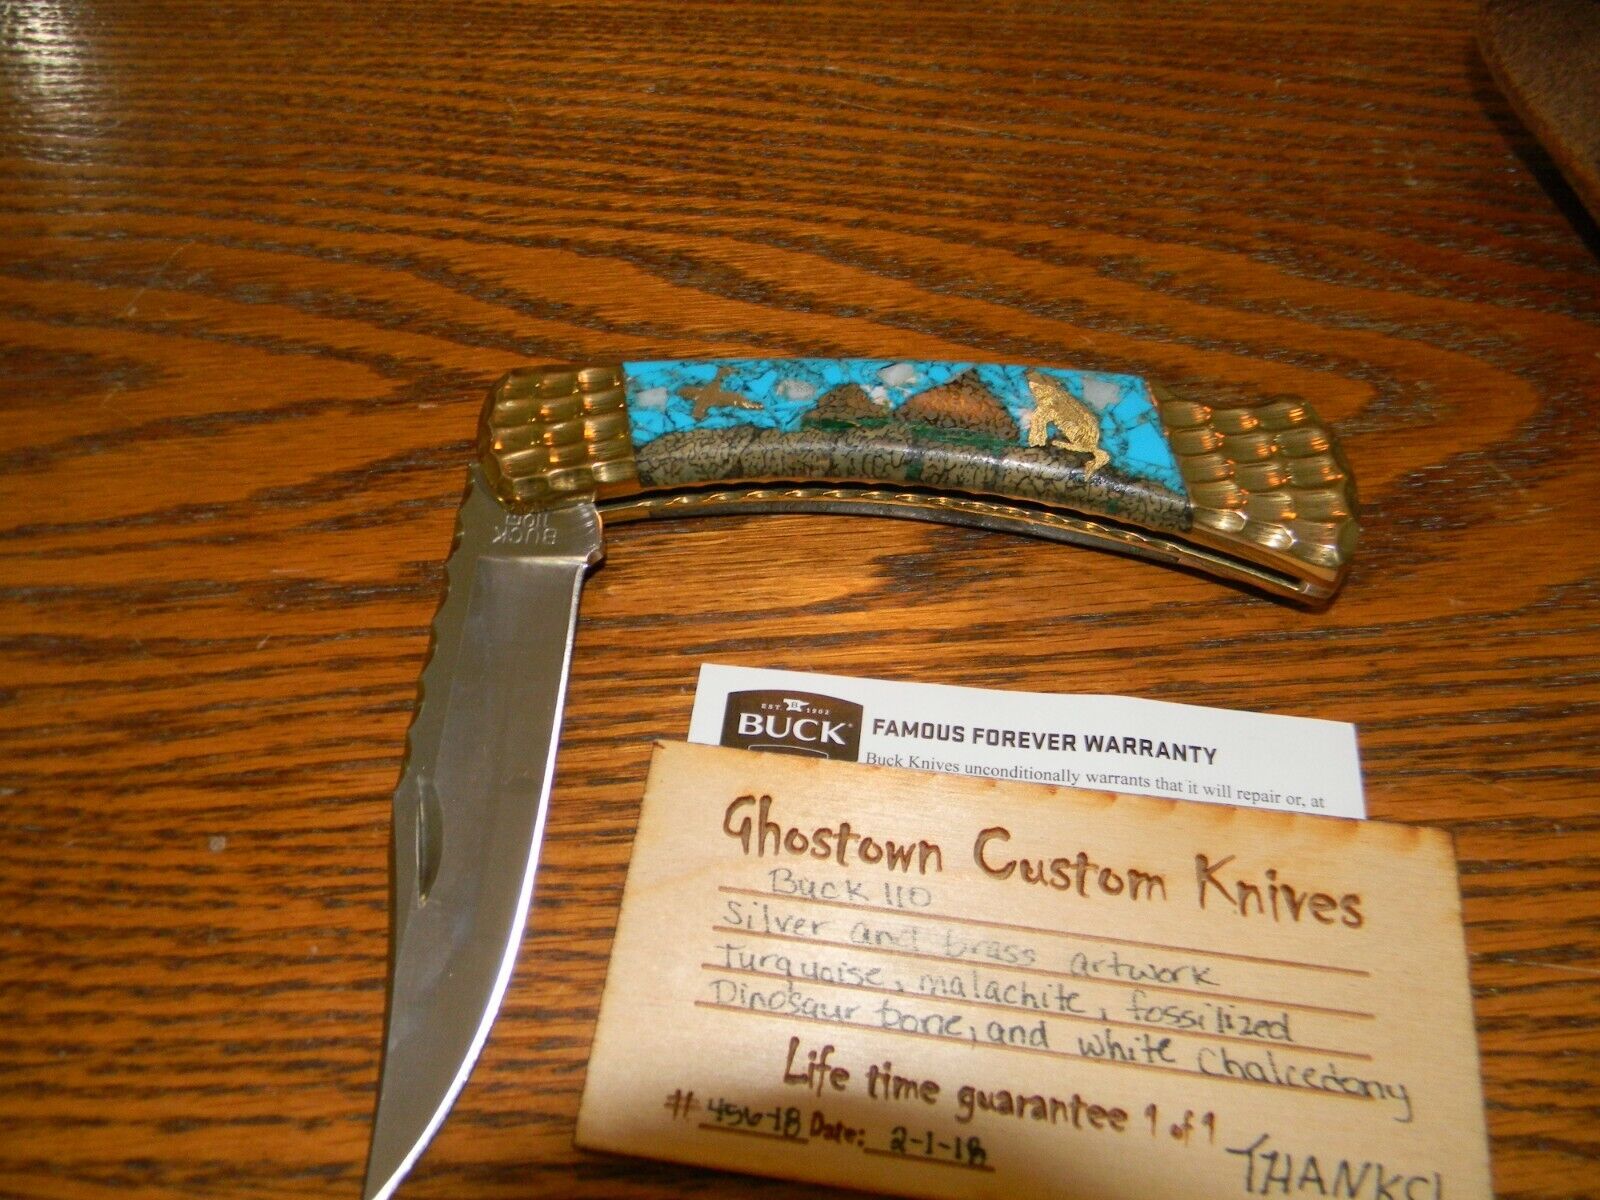 Beautiful Buck Knife Ghost town Customs Silver and Brass Artwork